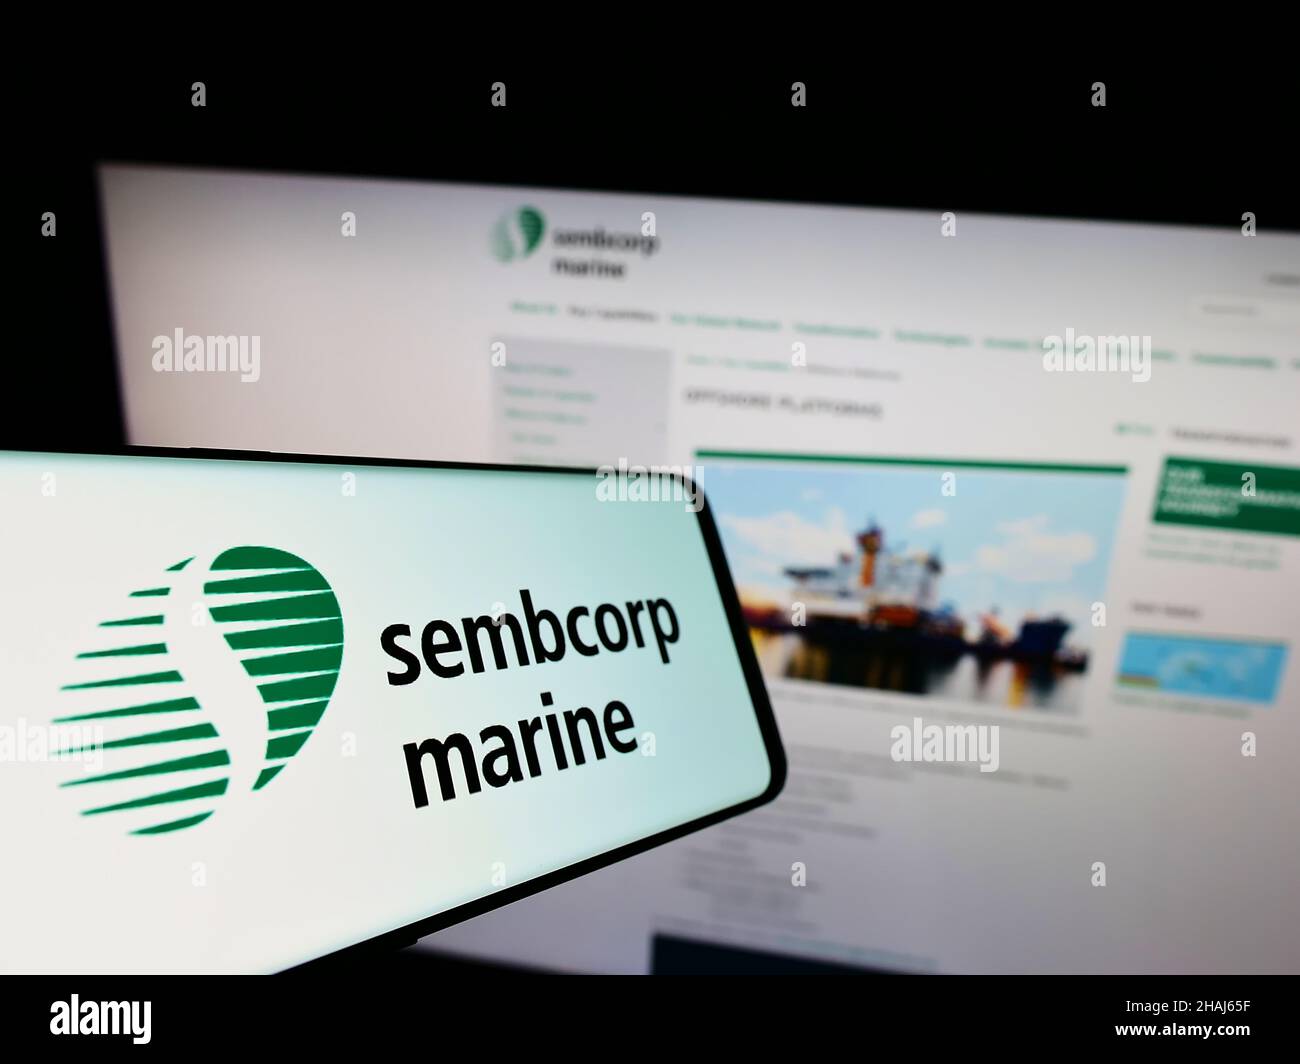 Cellphone with logo of Singaporean company Sembcorp Industries Ltd on screen in front of business website. Focus on center-left of phone display. Stock Photo